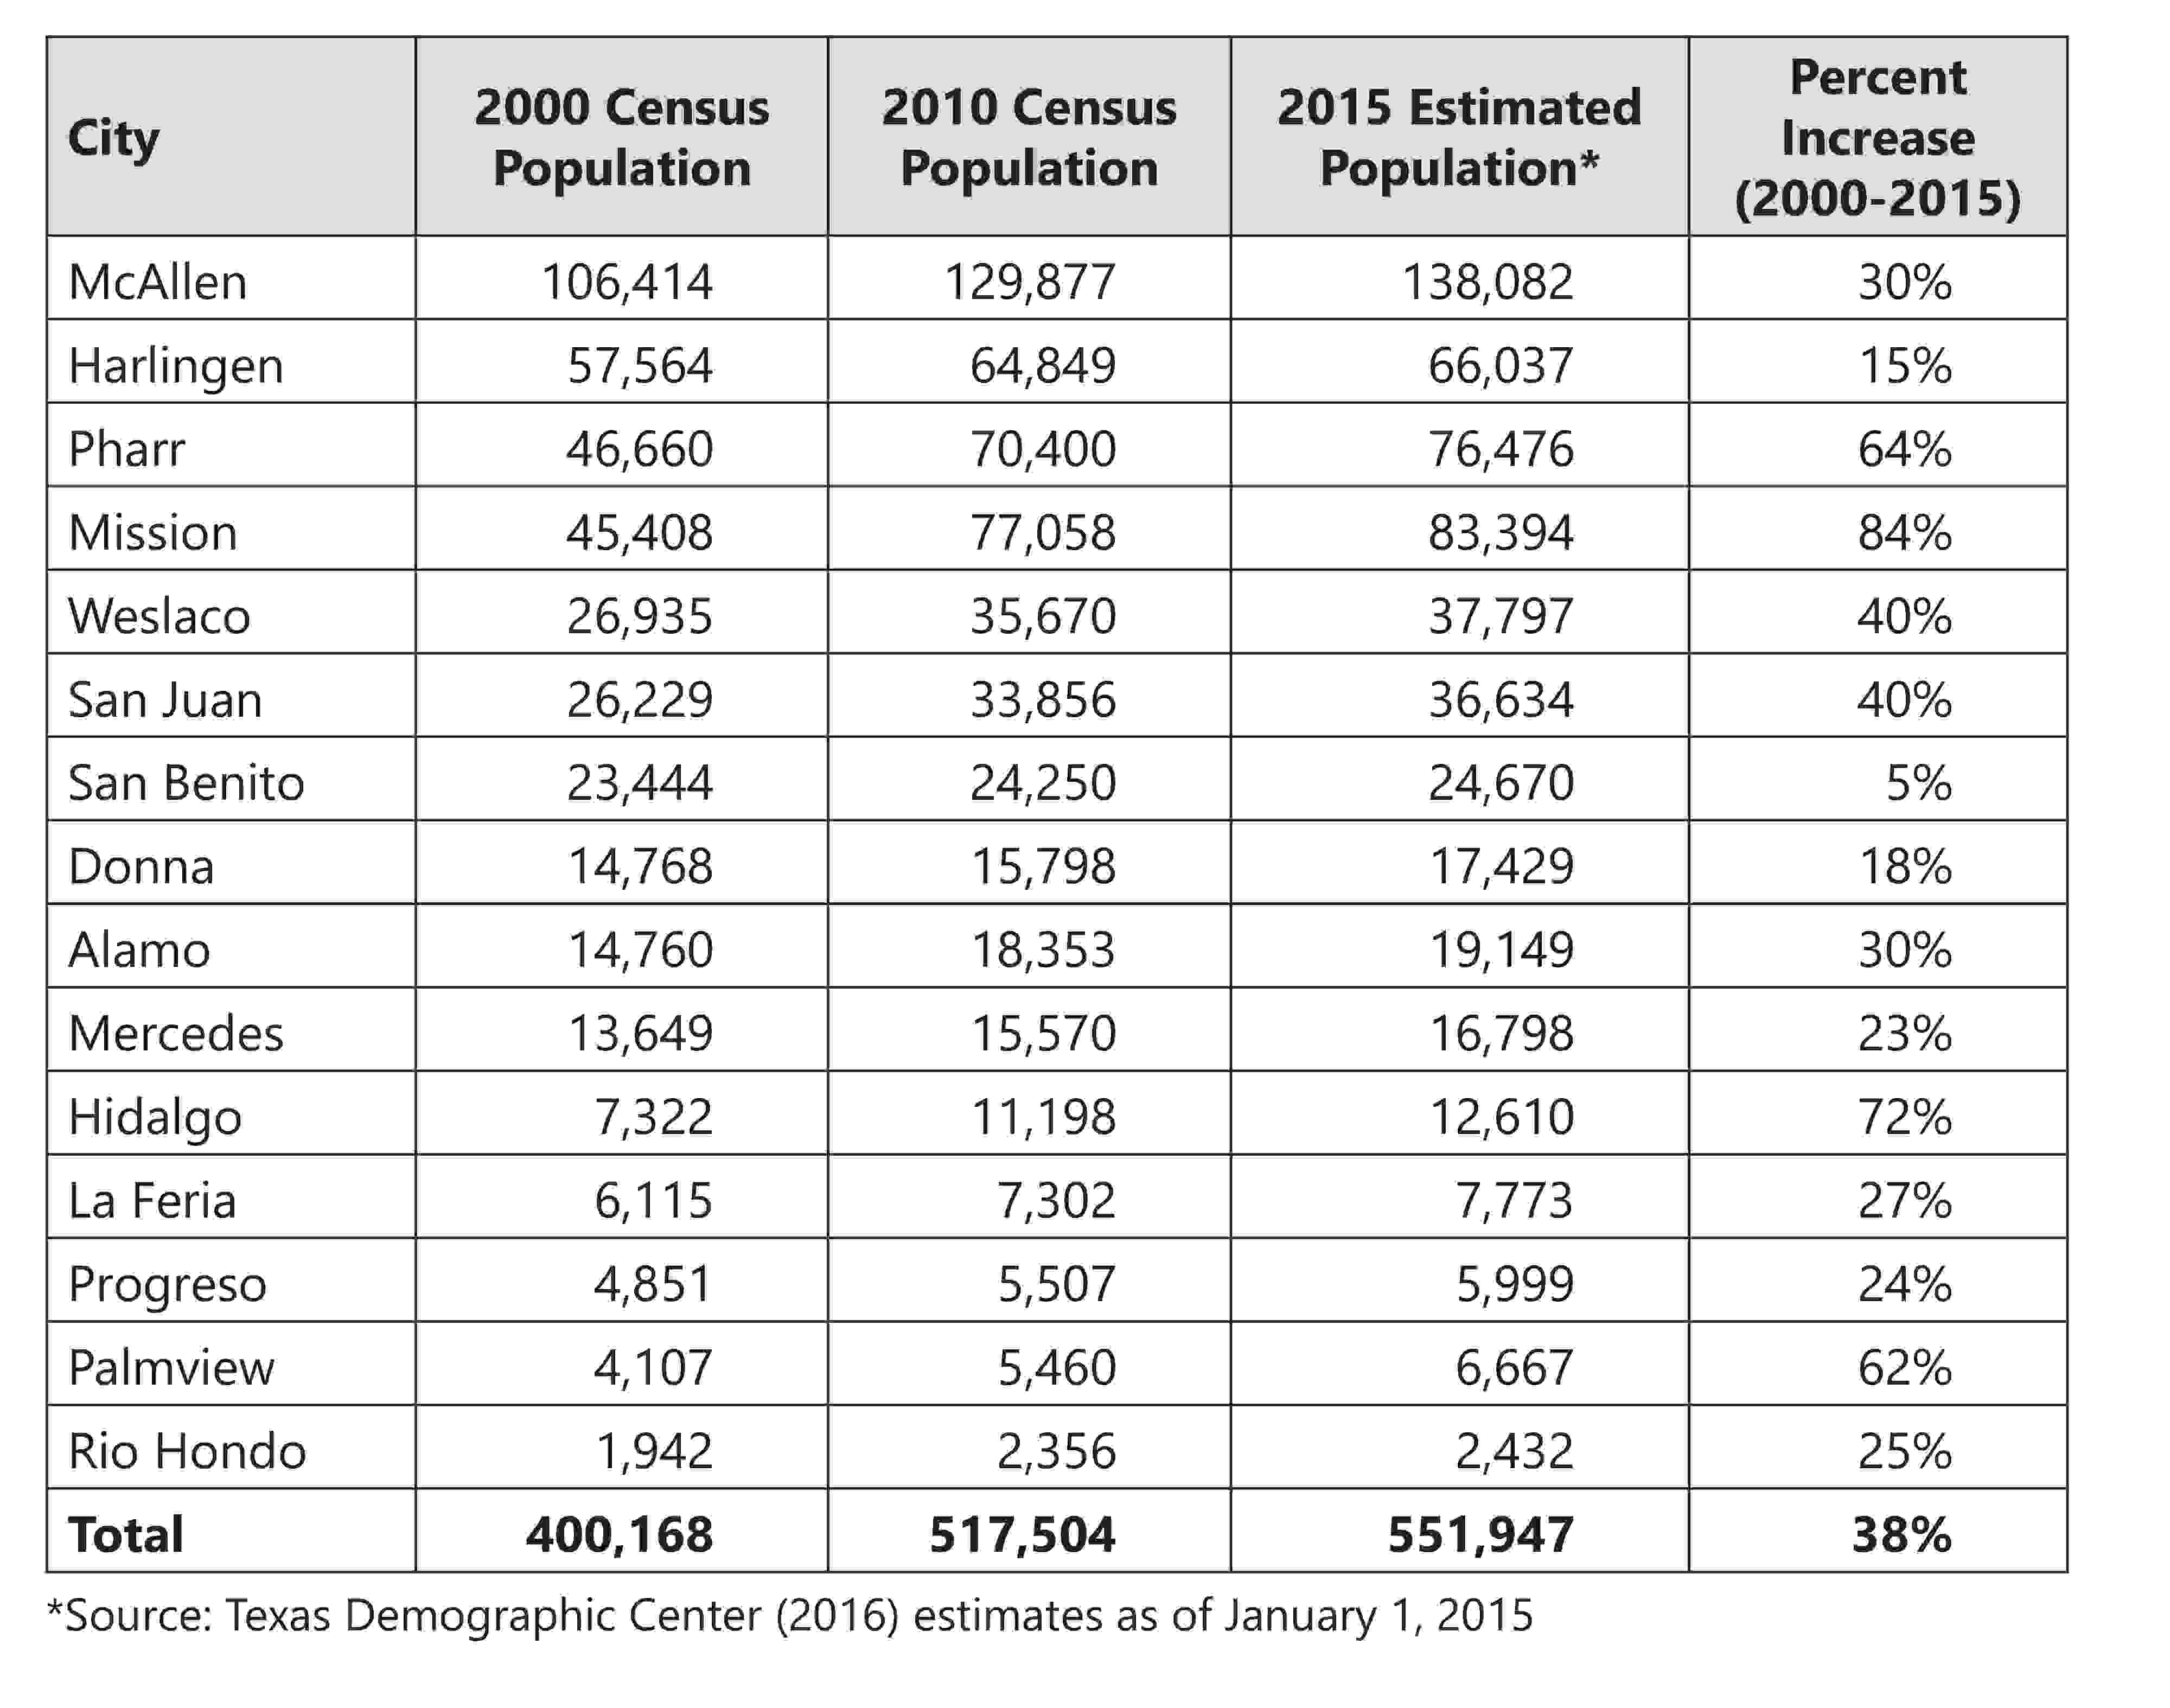 Table 2.1. Population changes of cities in the Arroyo Colorado watershed